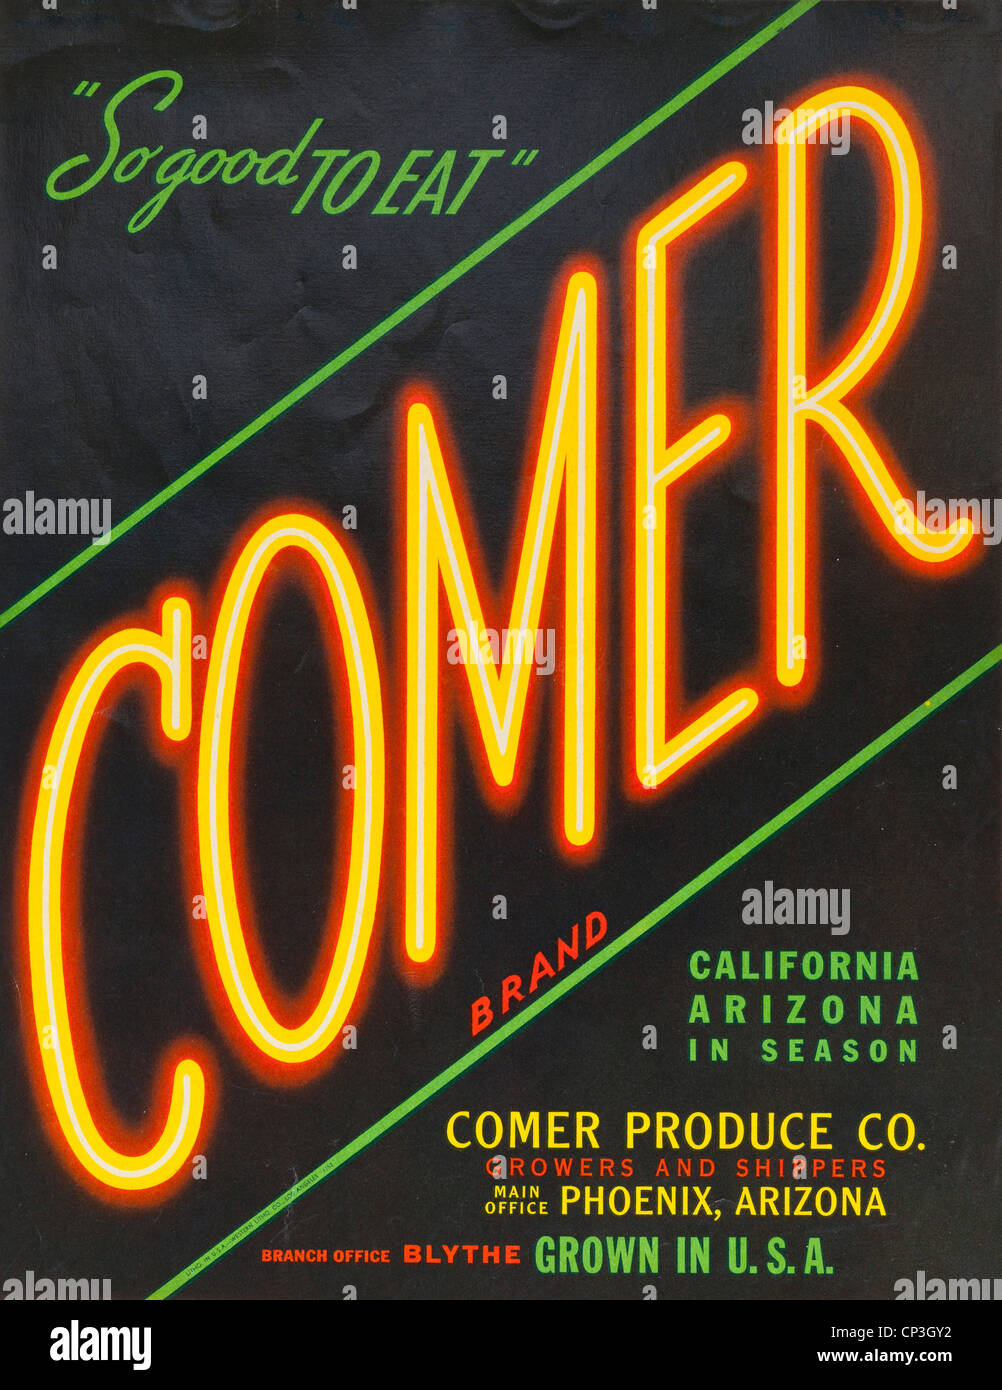 USA 1940s vegetable crate label - 'Comer' - 'So good to eat' Stock Photo